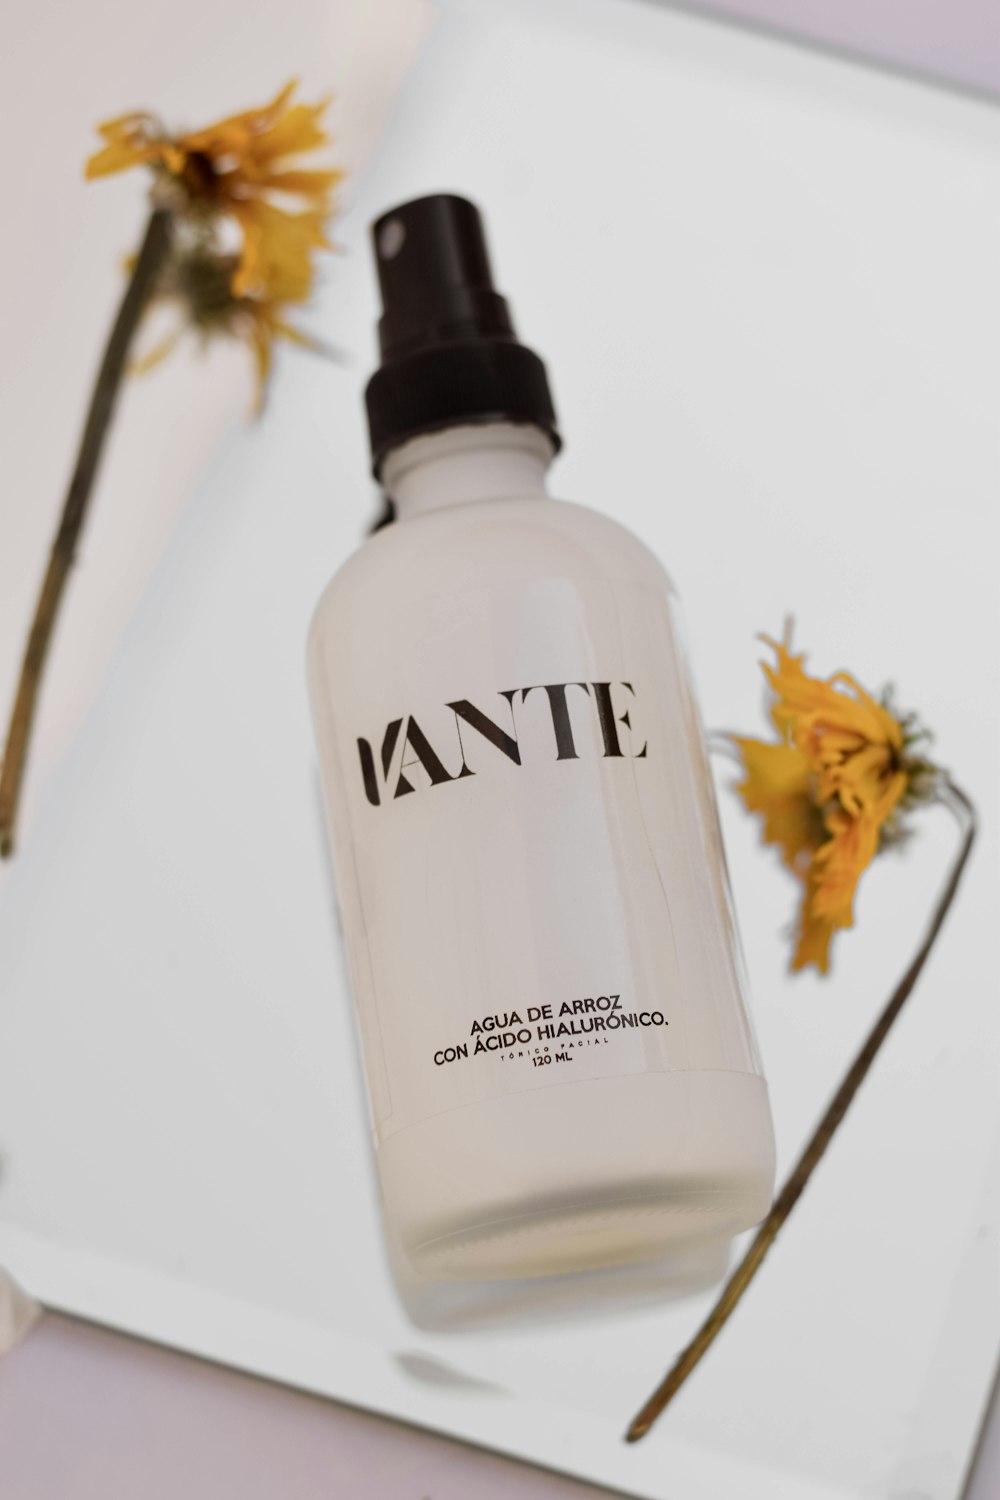 a bottle of tante on a table next to flowers